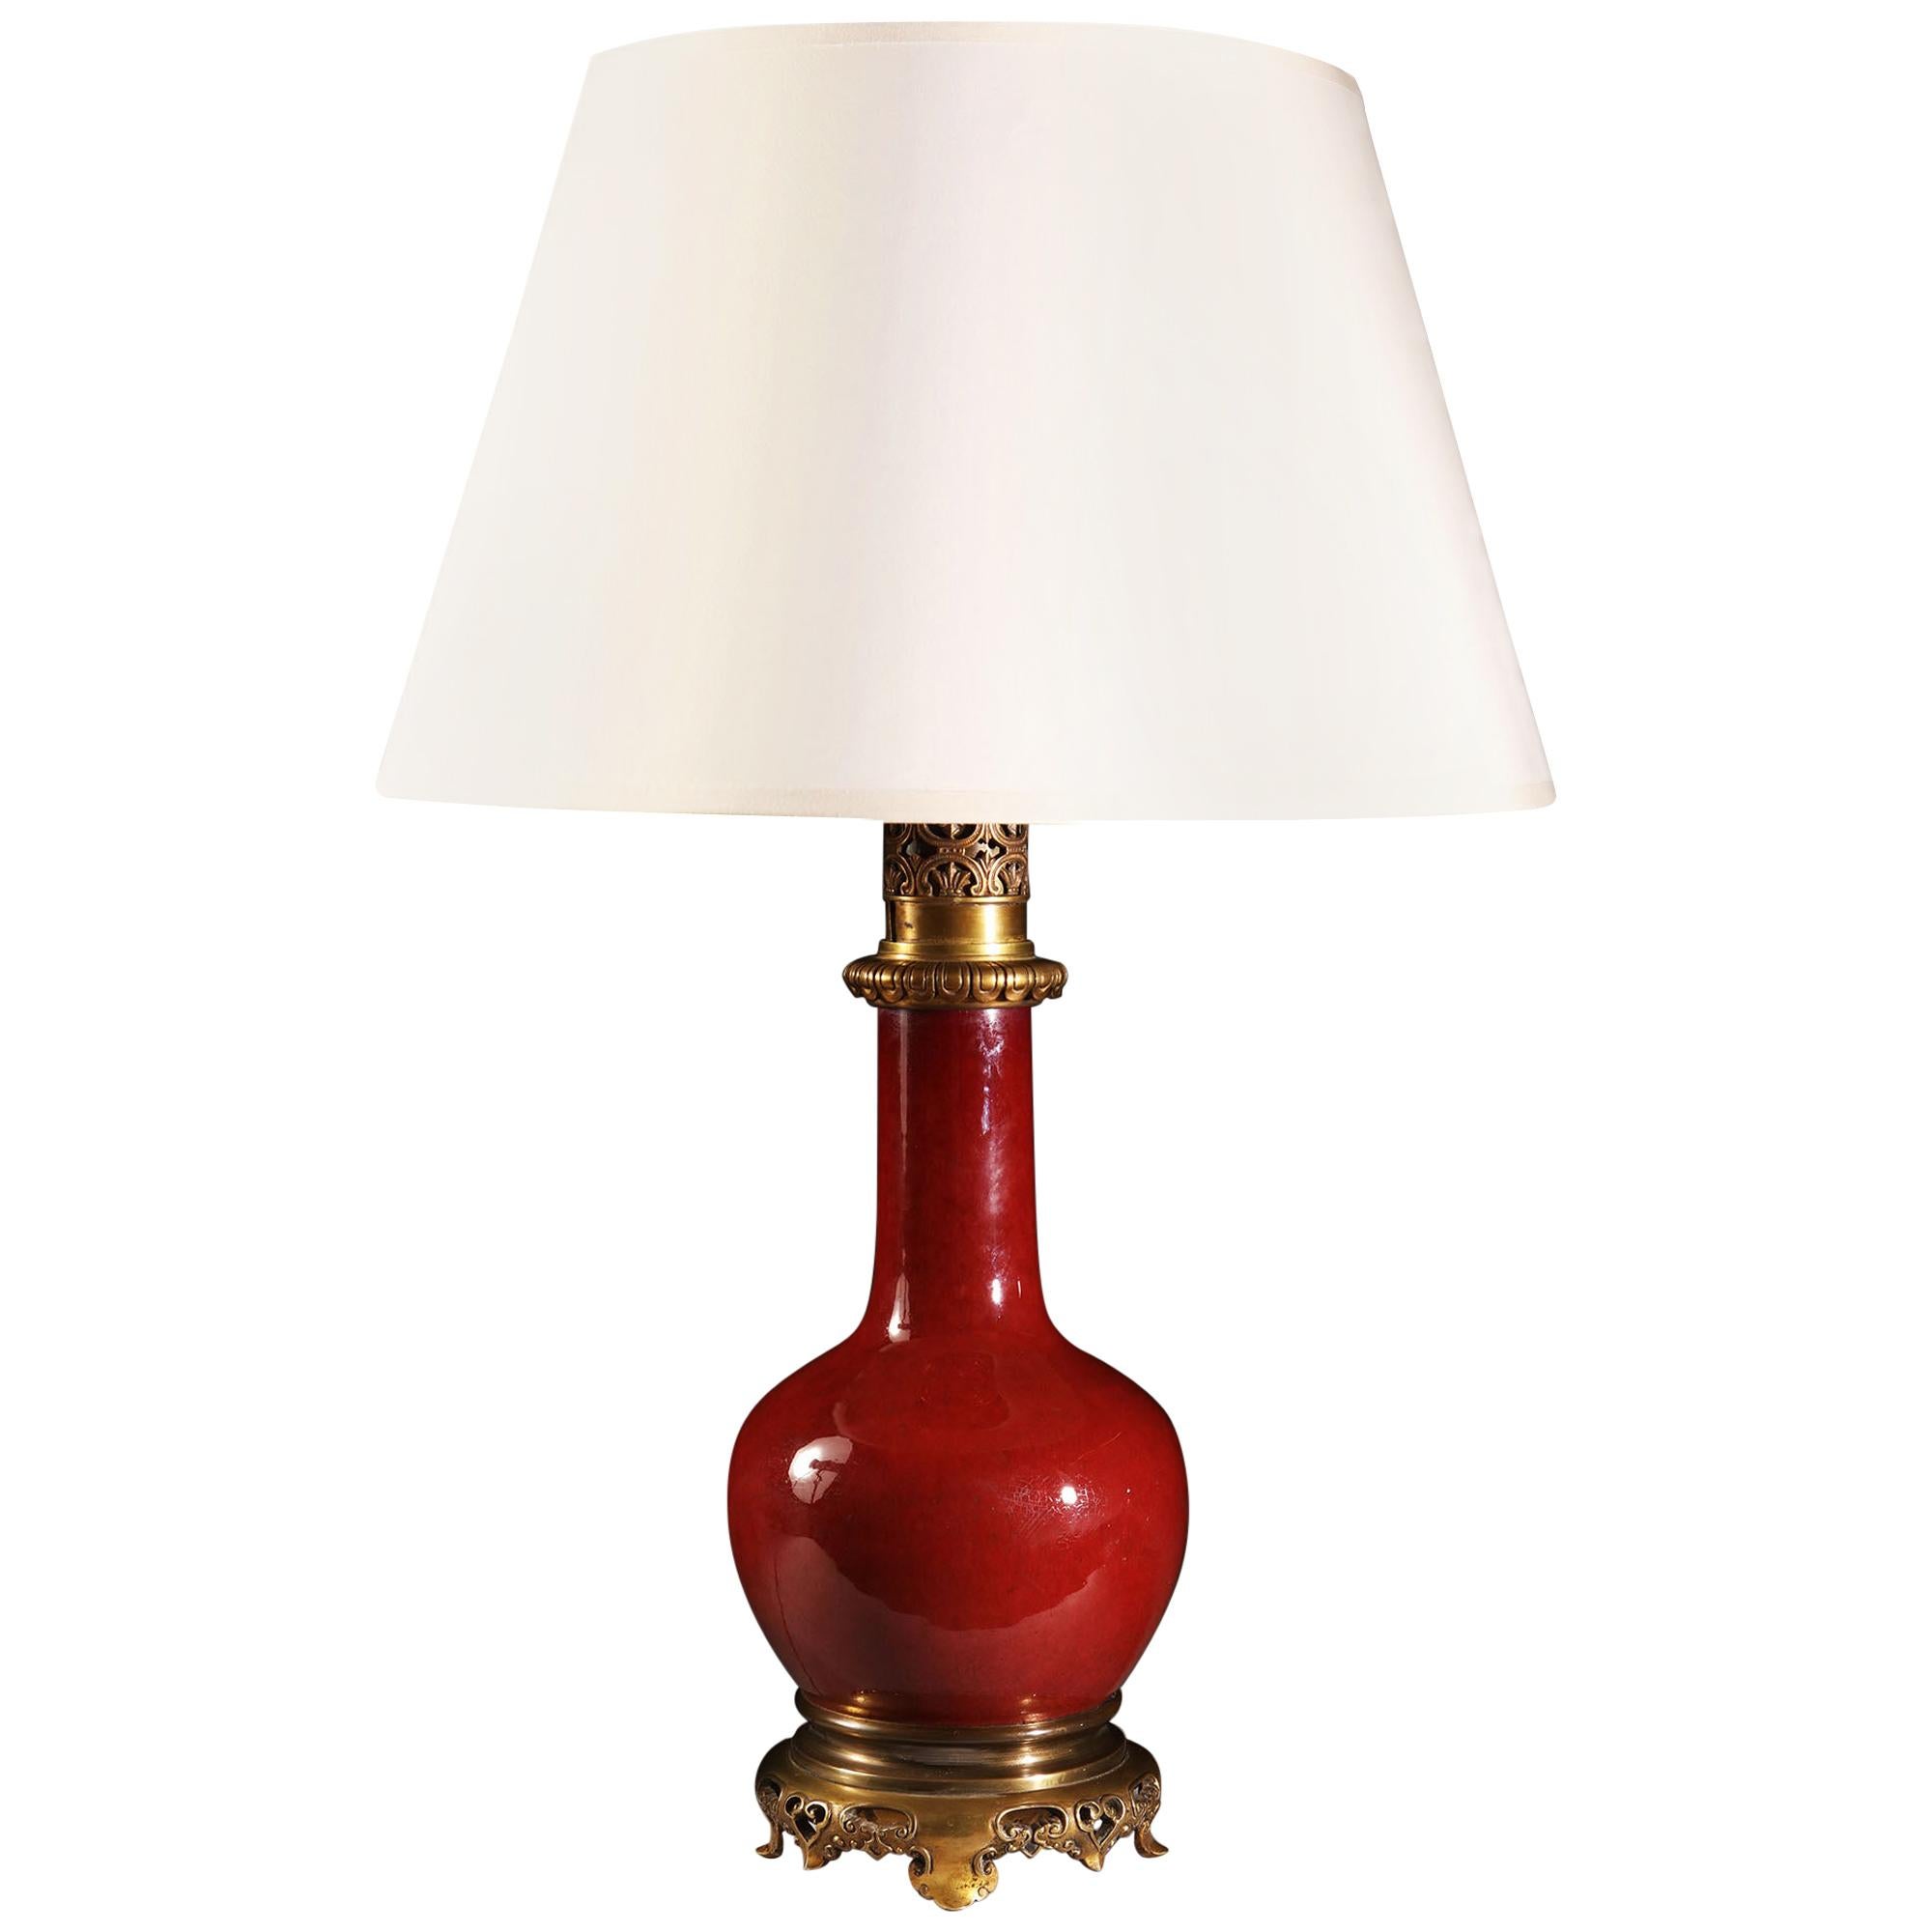 Mid-19th Century Red Sang De Boeuf Vase as a Table Lamp with Brass Mounts